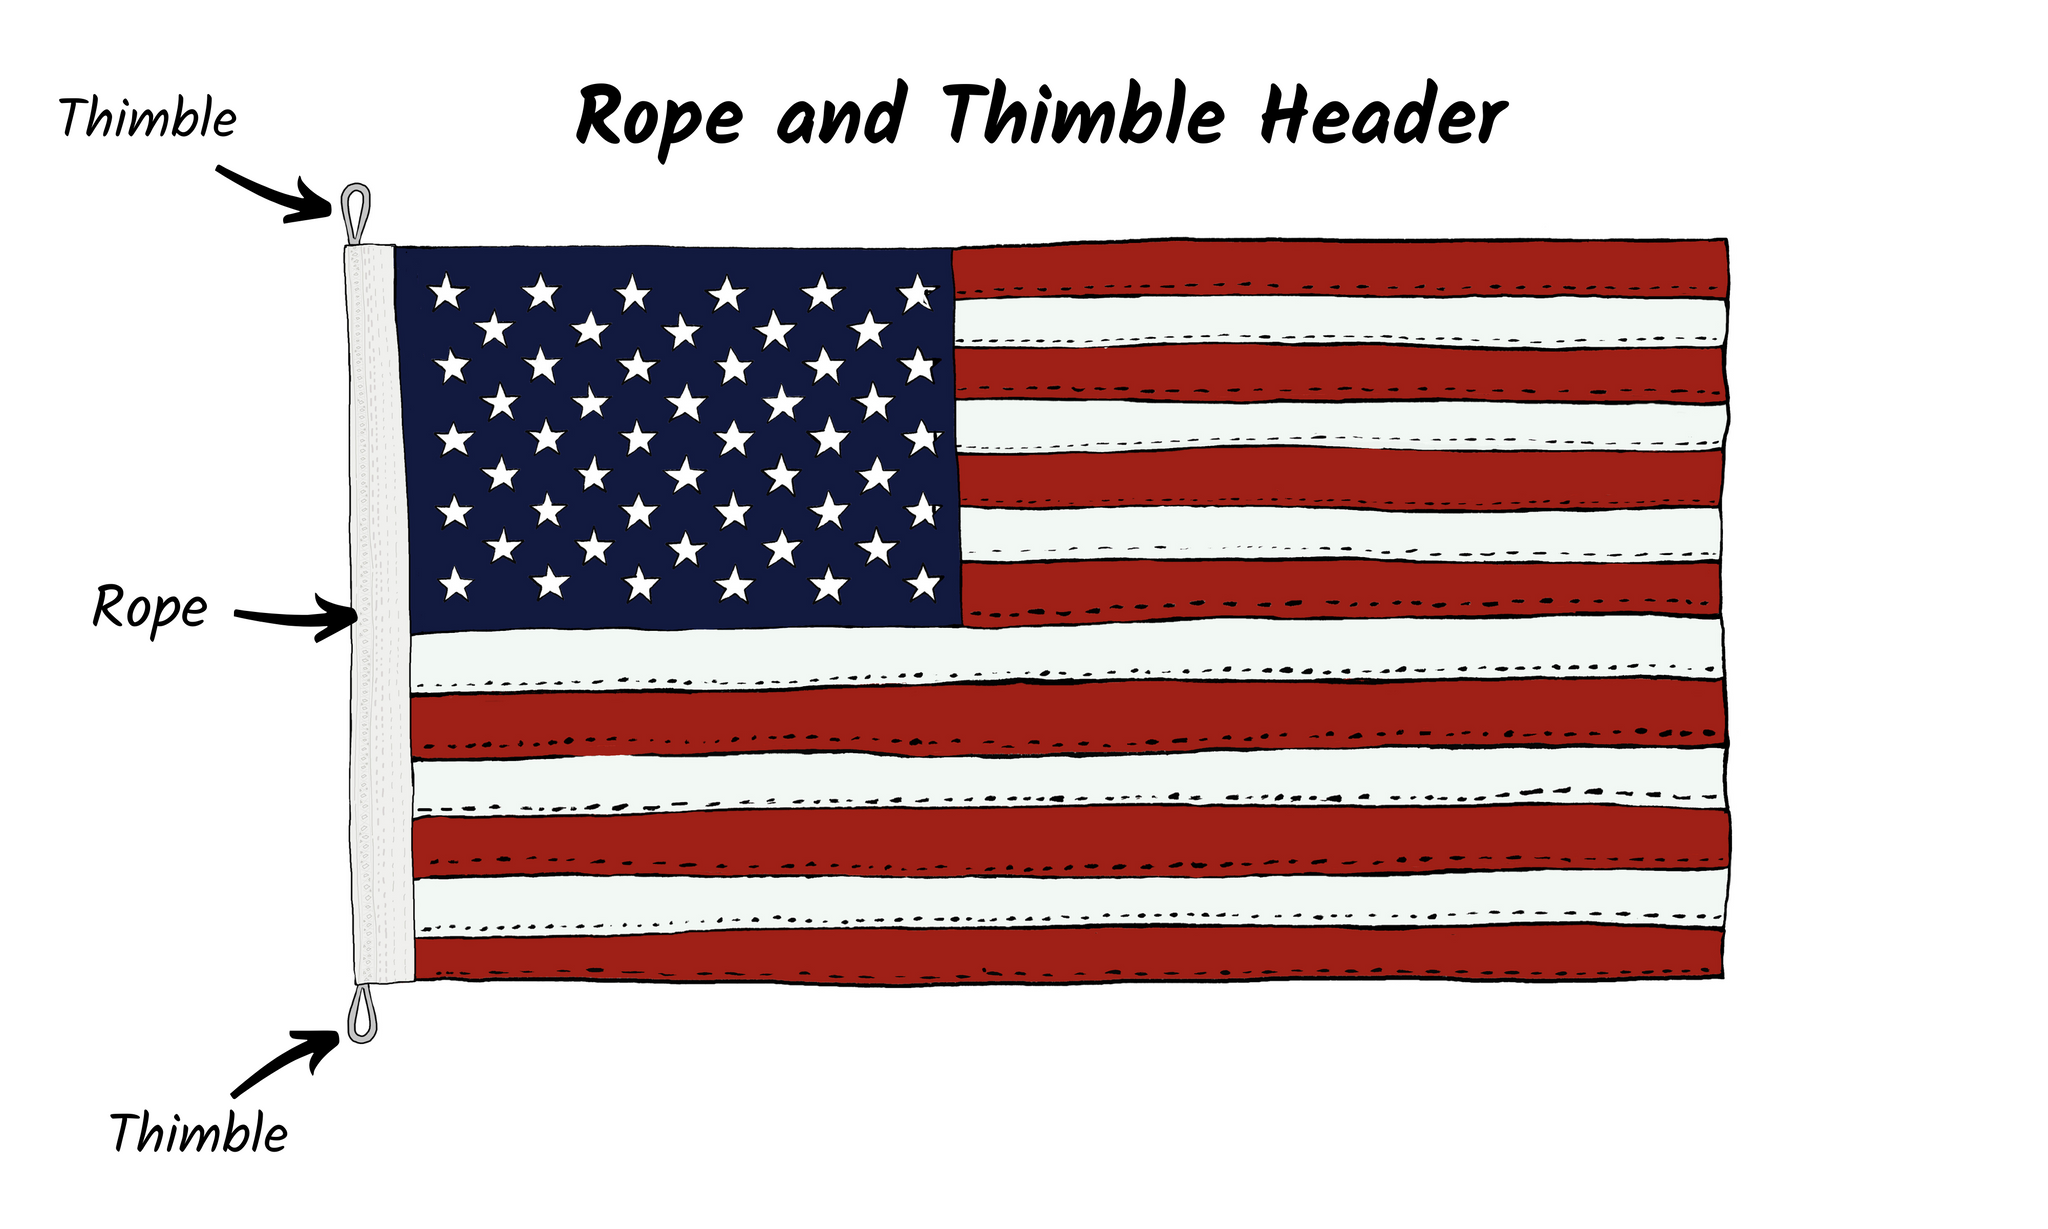 US Flag with rope and thimble header